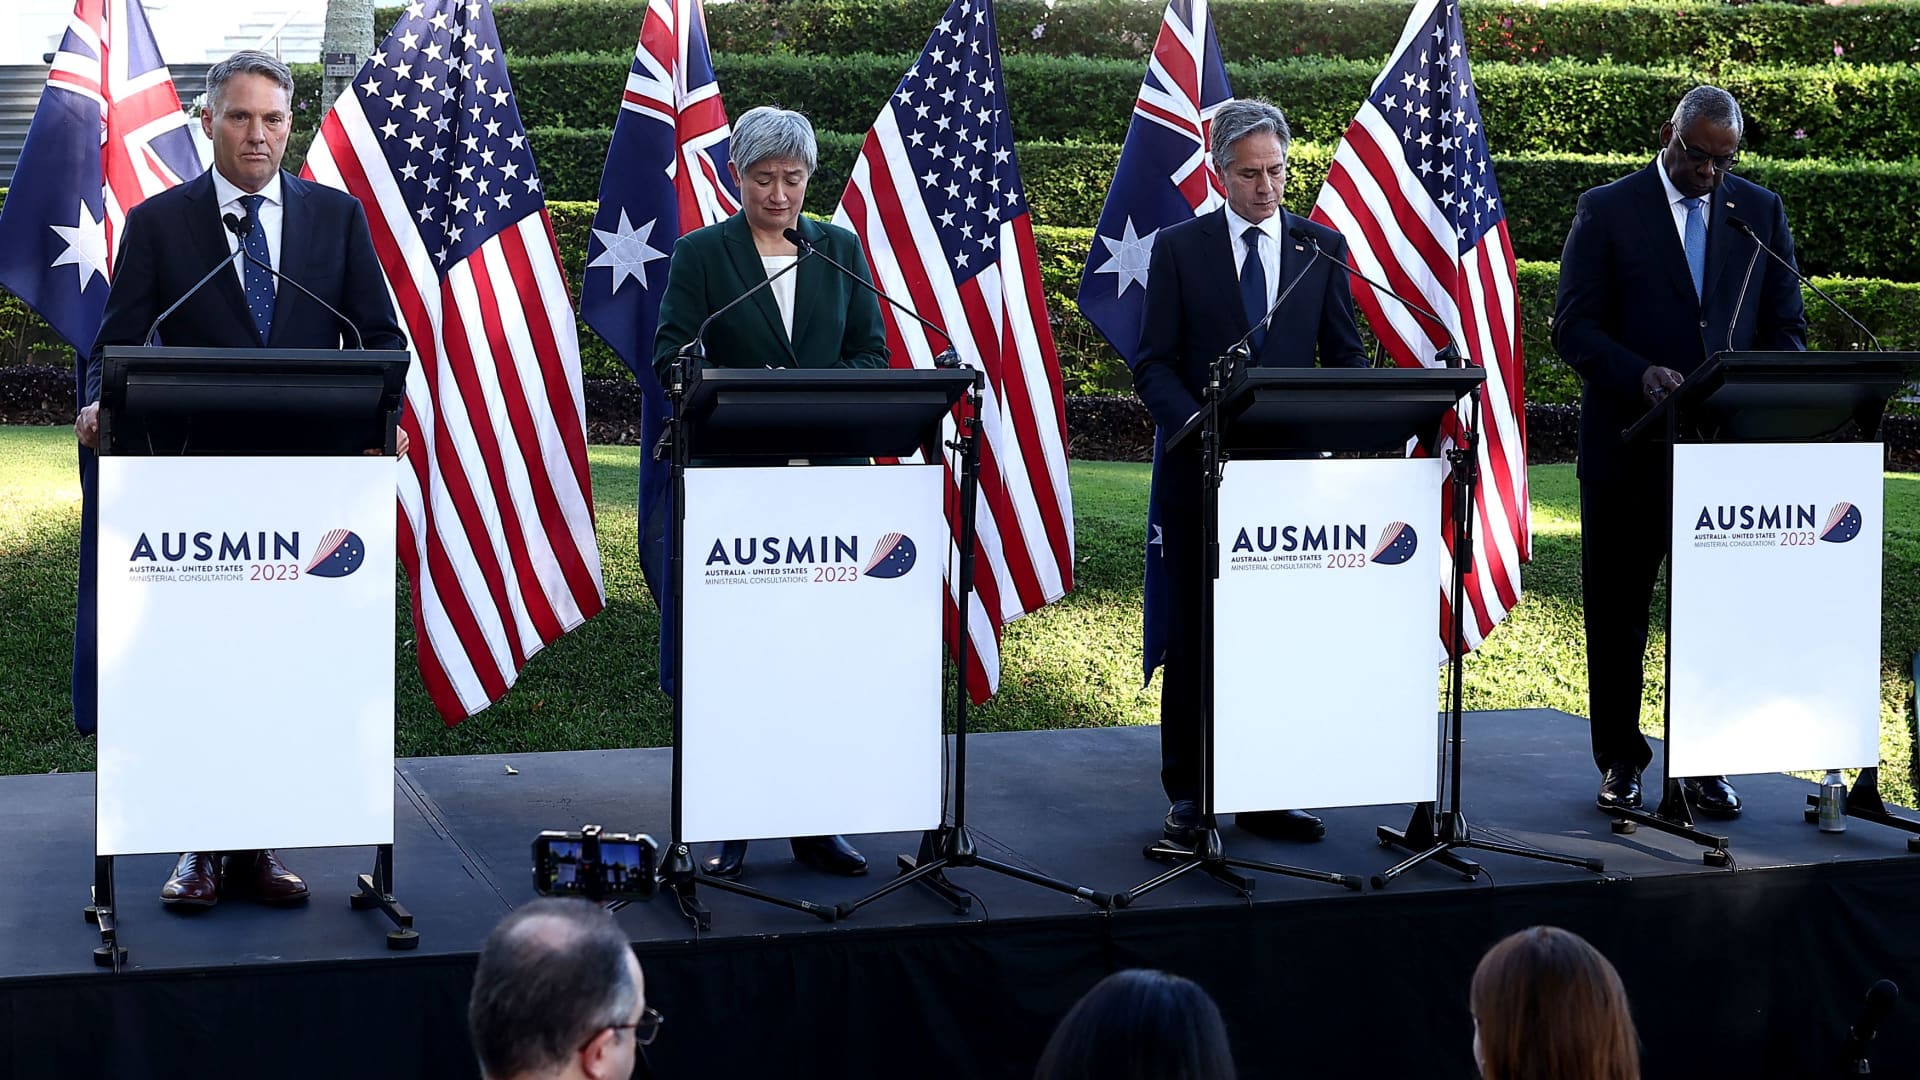 U.S. to help Australia develop guided missiles by 2025